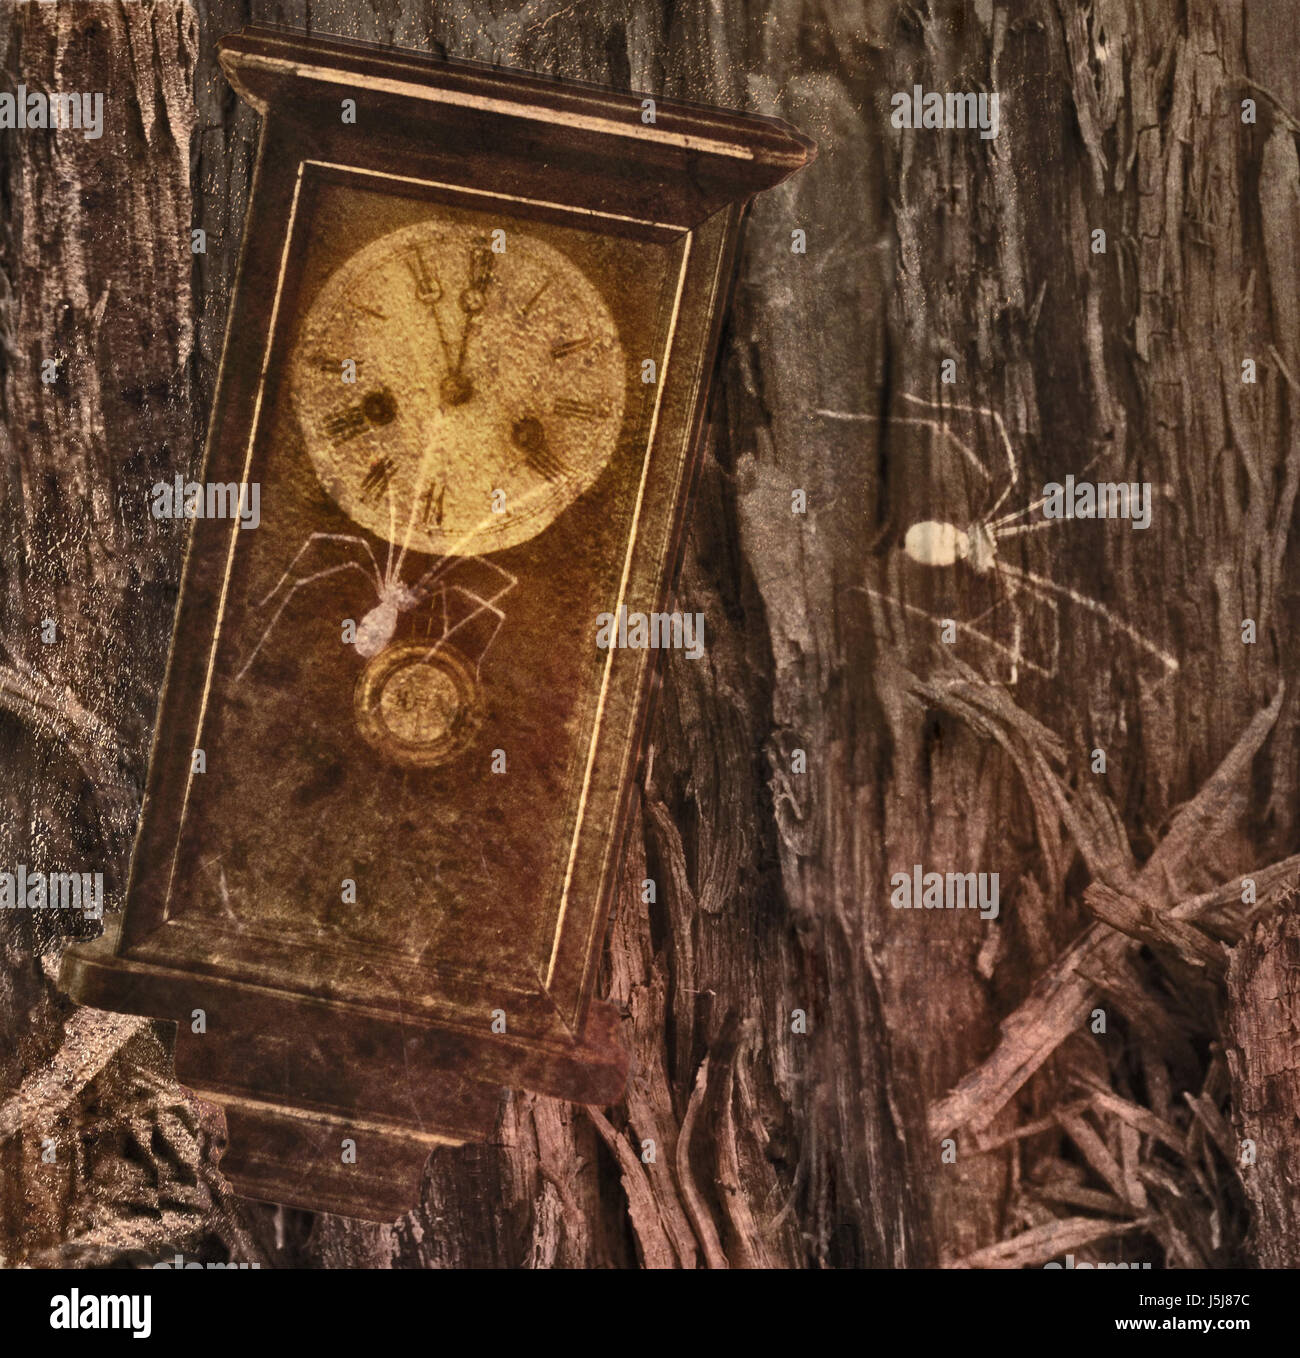 wood,clock,time,spin,rust,yrs,barred,old,5 vor 12,spinnenweben,digiart Stock Photo